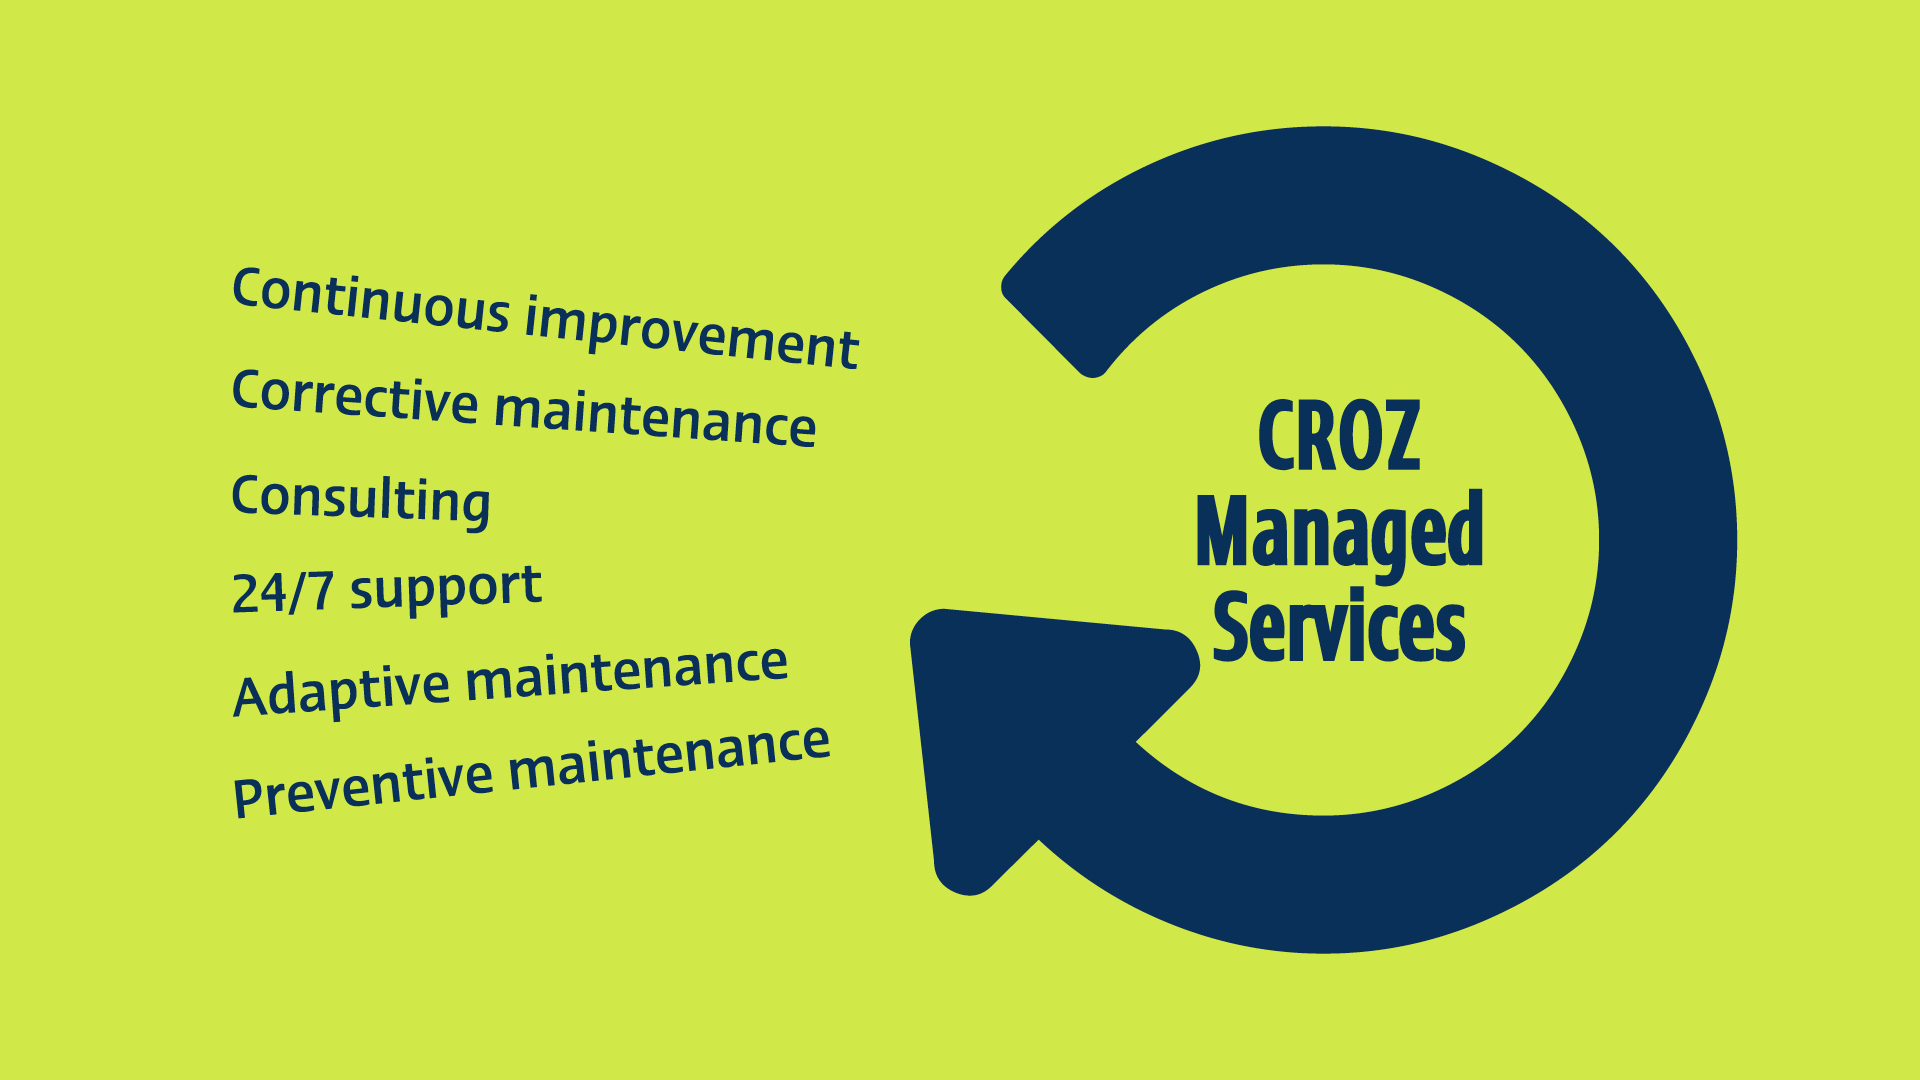 Benefits of managed services